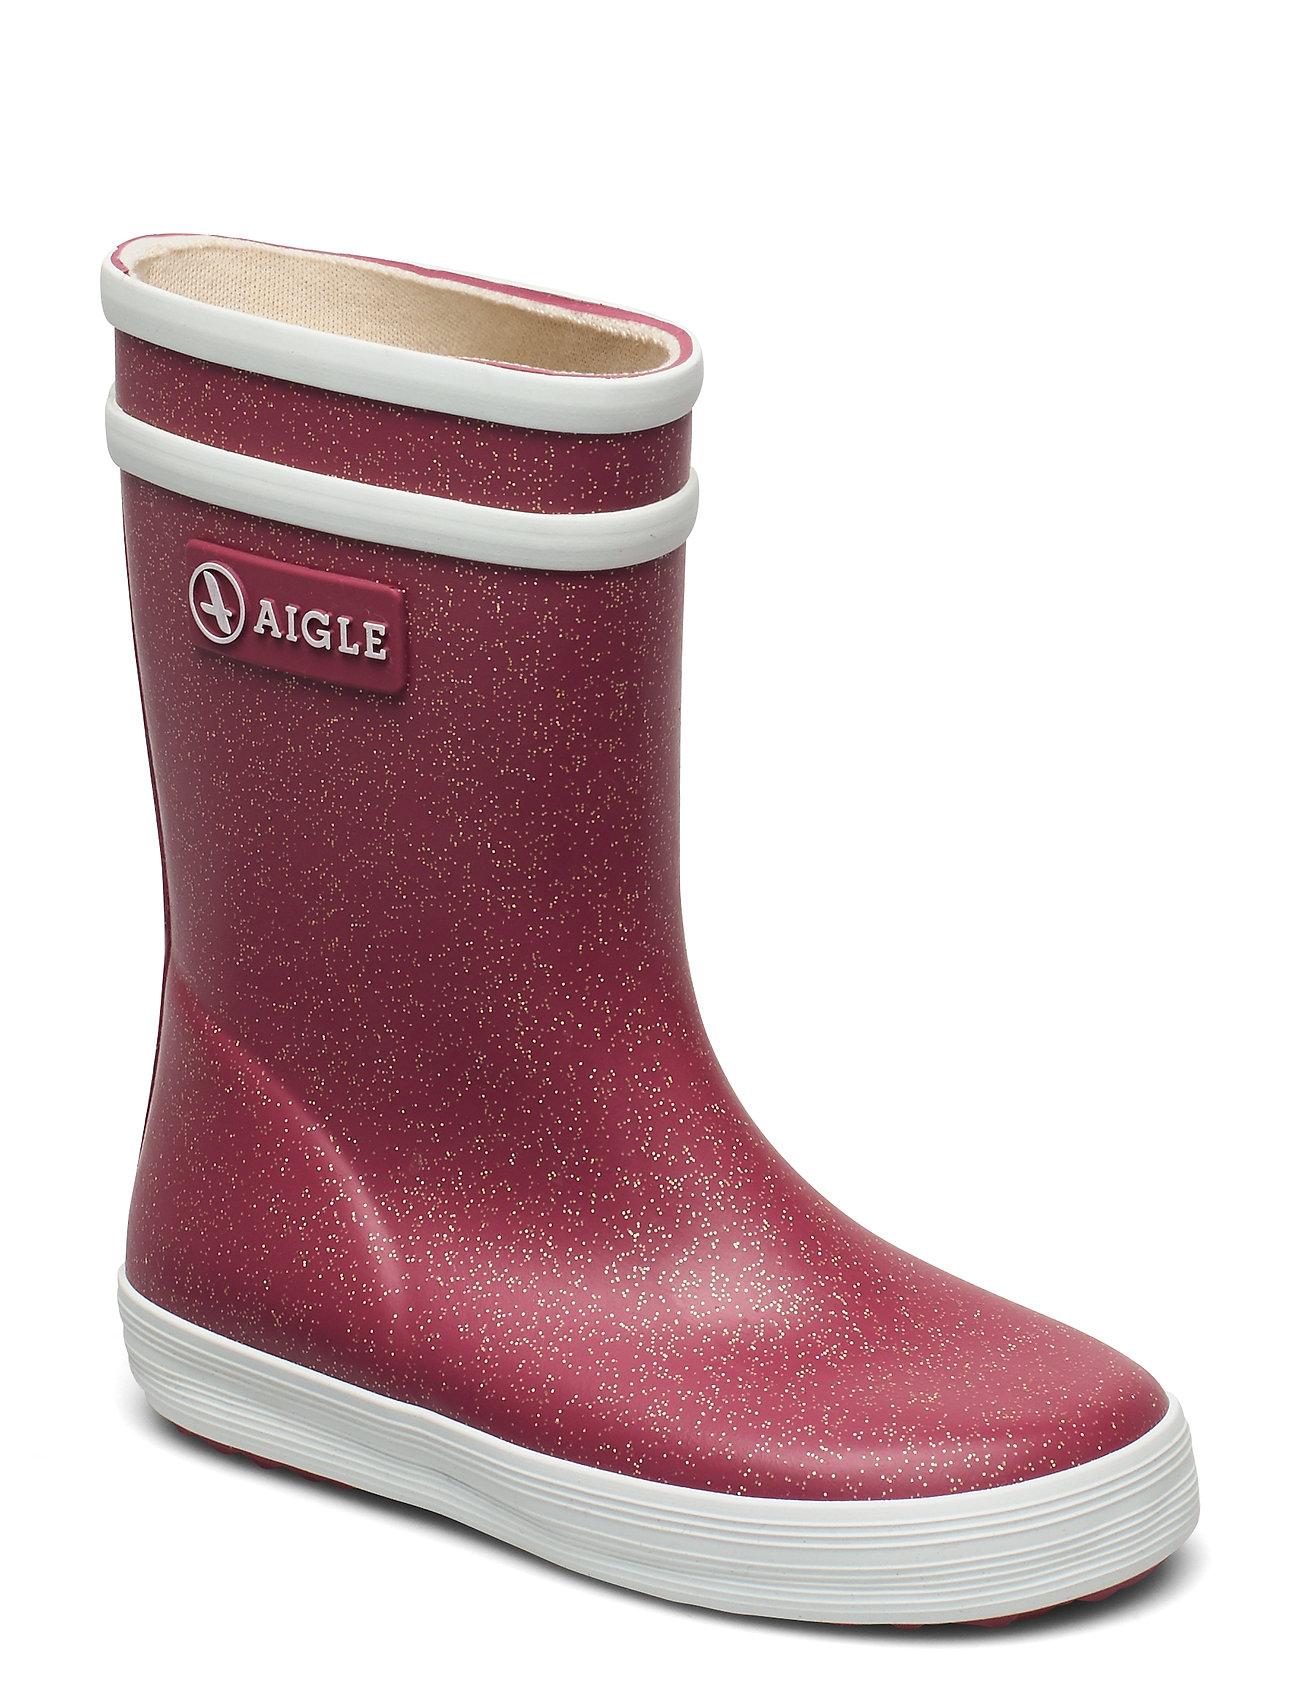 Ai Baby Flac Glit Garance Shoes Rubberboots Unlined Rubberboots Punainen Aigle